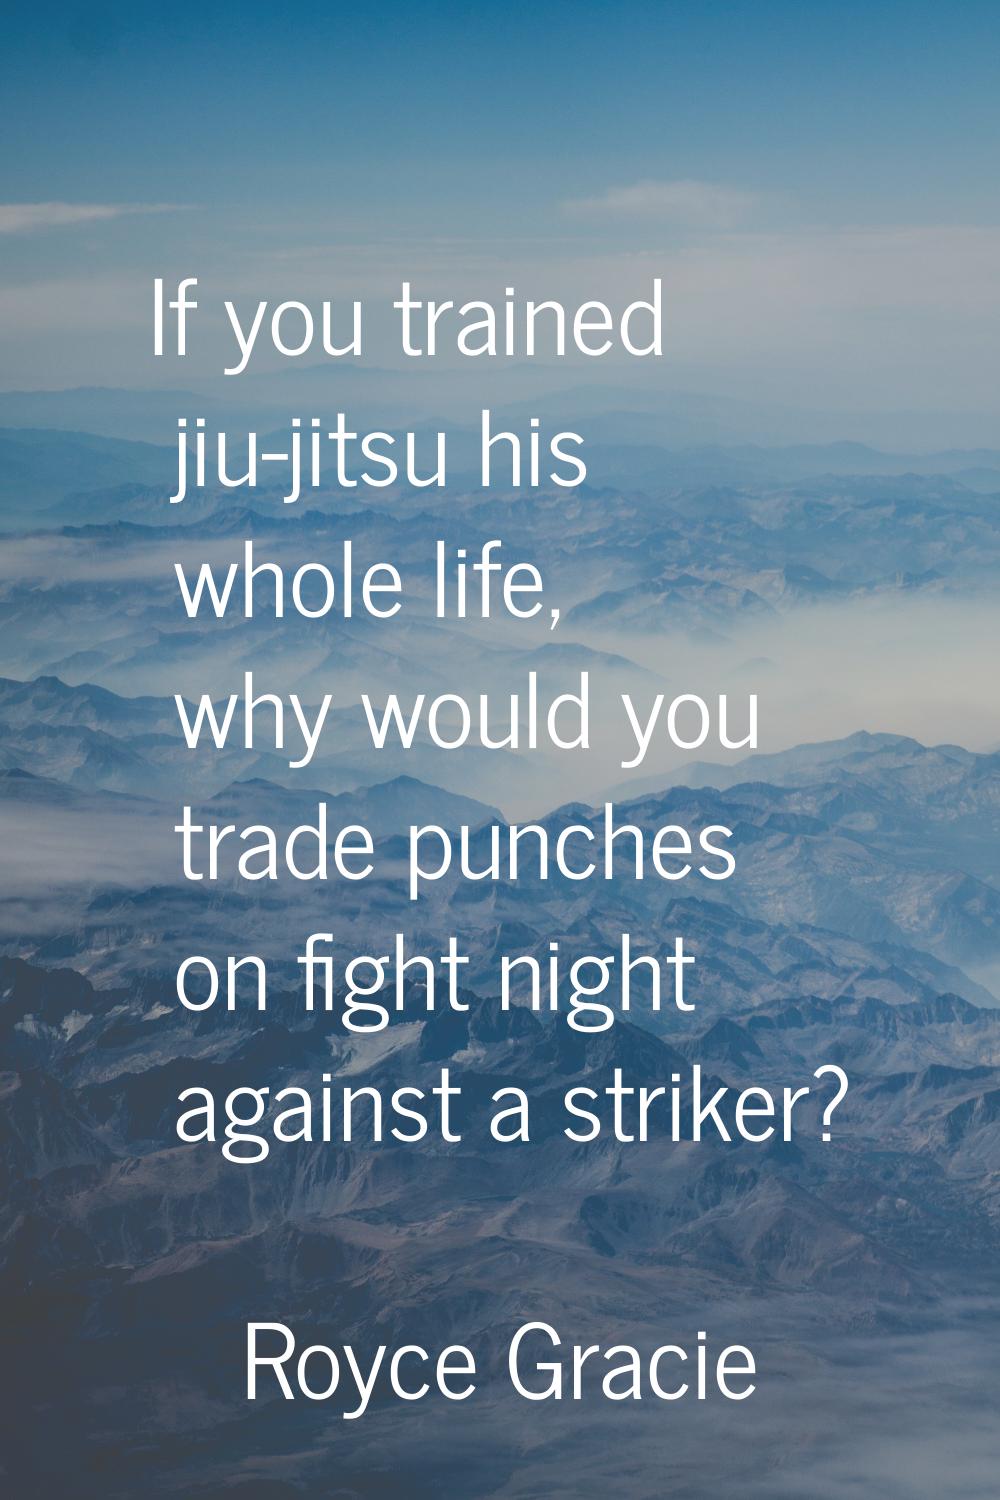 If you trained jiu-jitsu his whole life, why would you trade punches on fight night against a strik